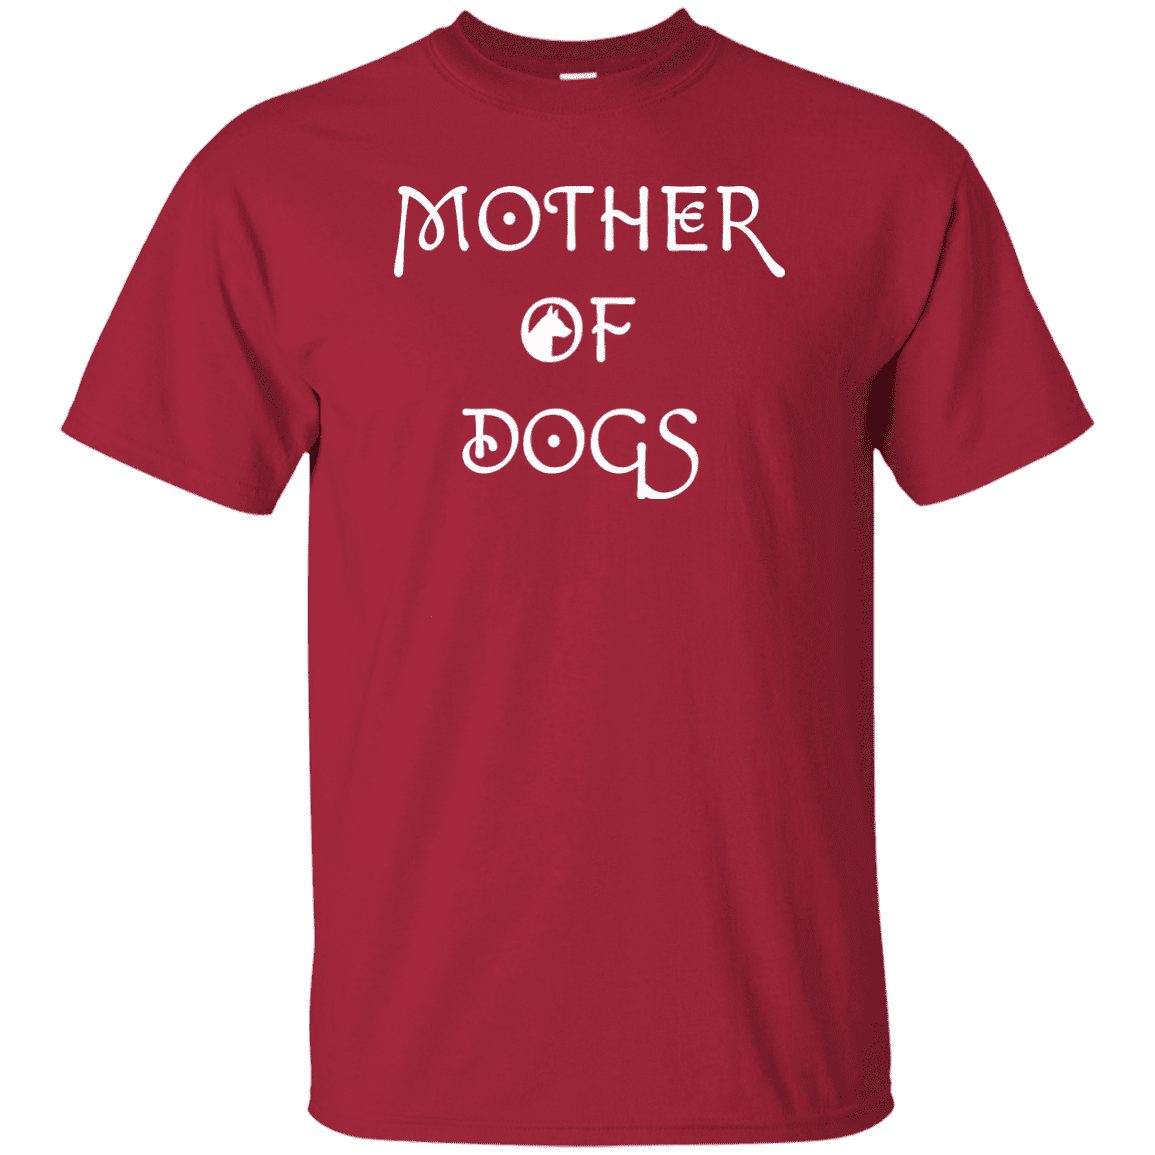 Mother Of Dogs - T Shirt.